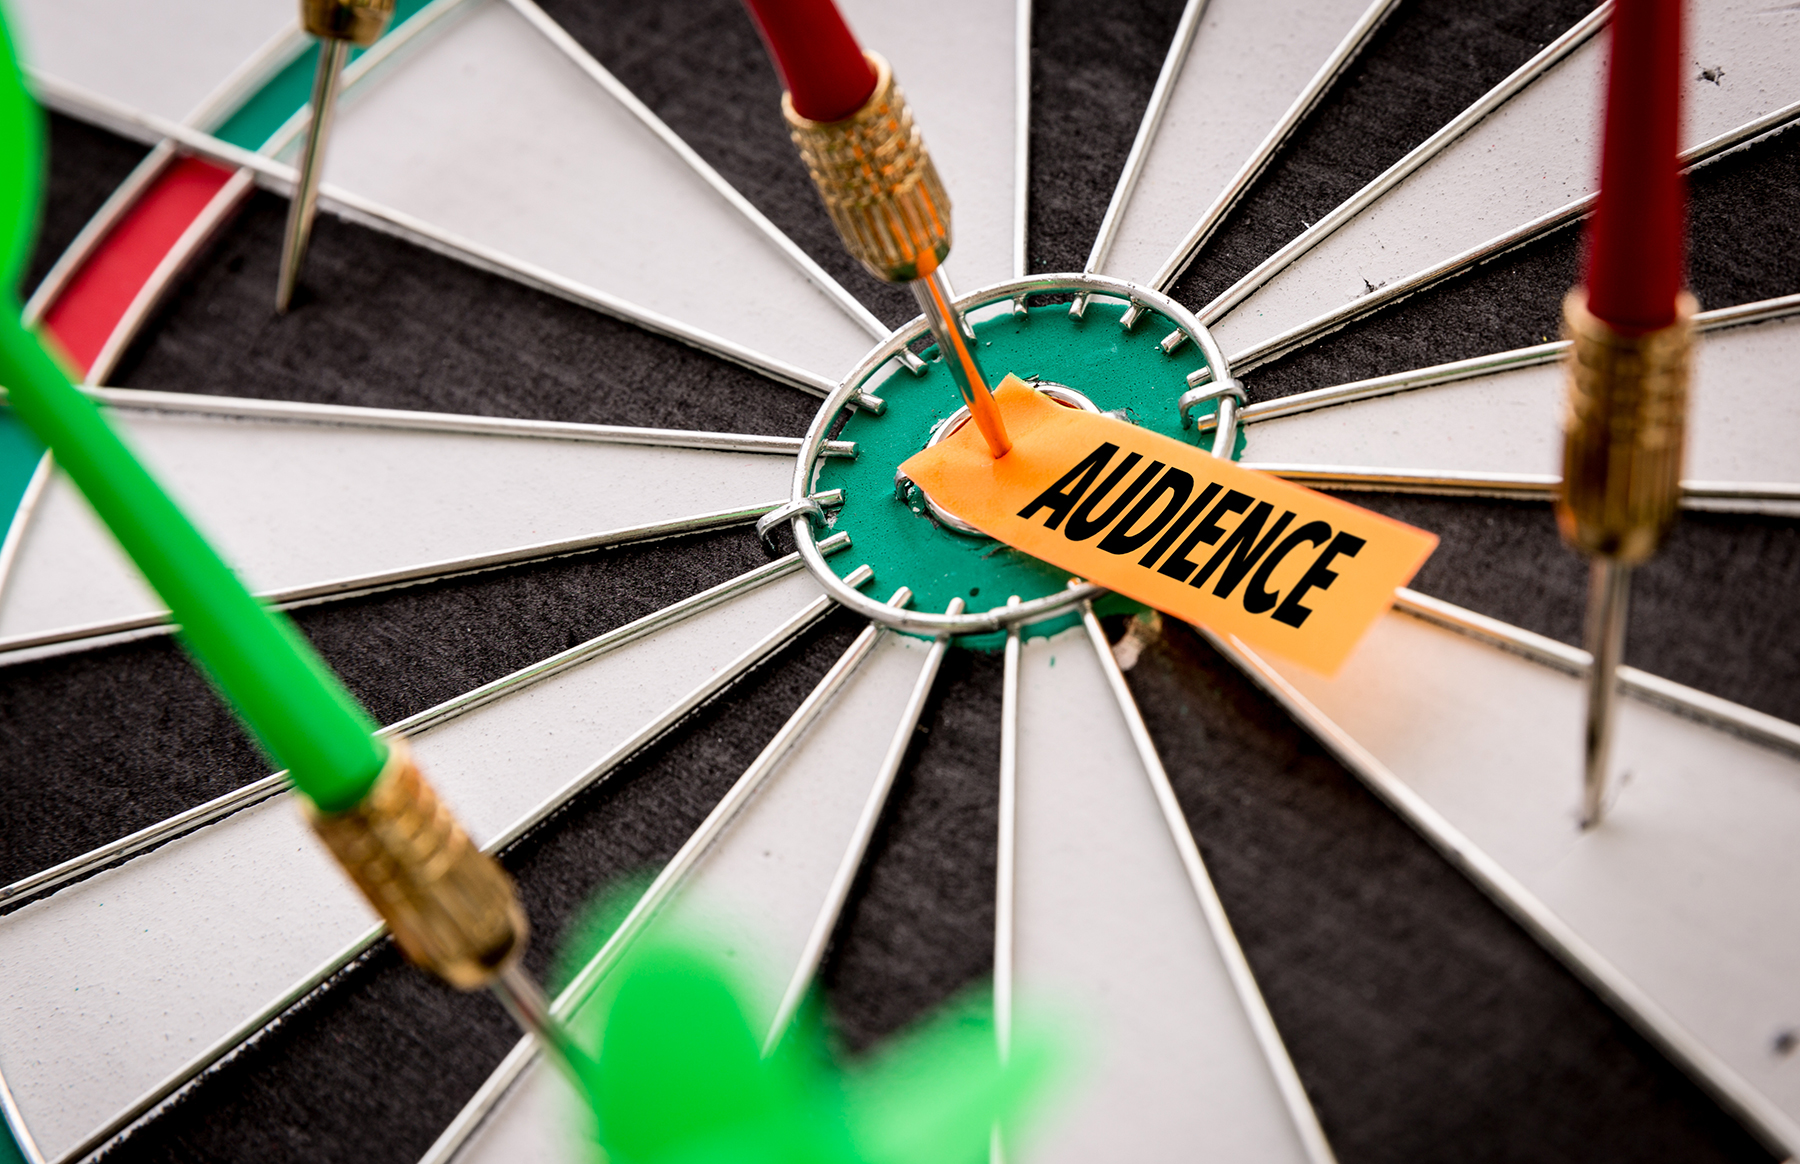 The Mechanics of Programmatic Display Behavioral and Content Targeting: What is Your Target Audience Up To?